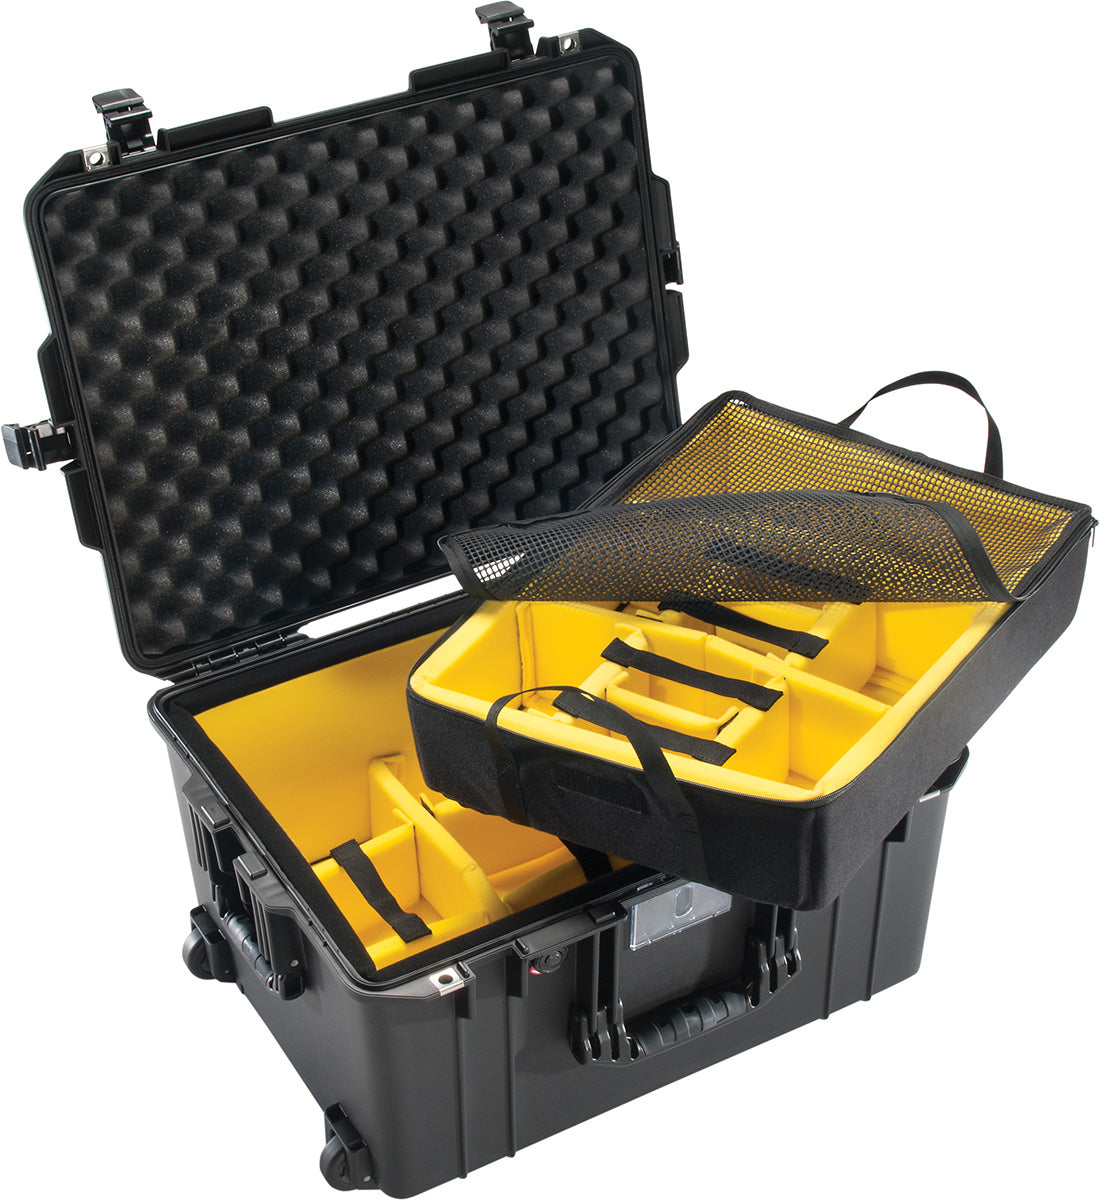 Pelican Air 1607 Lightweight Watertight Wheeled Check-In Case